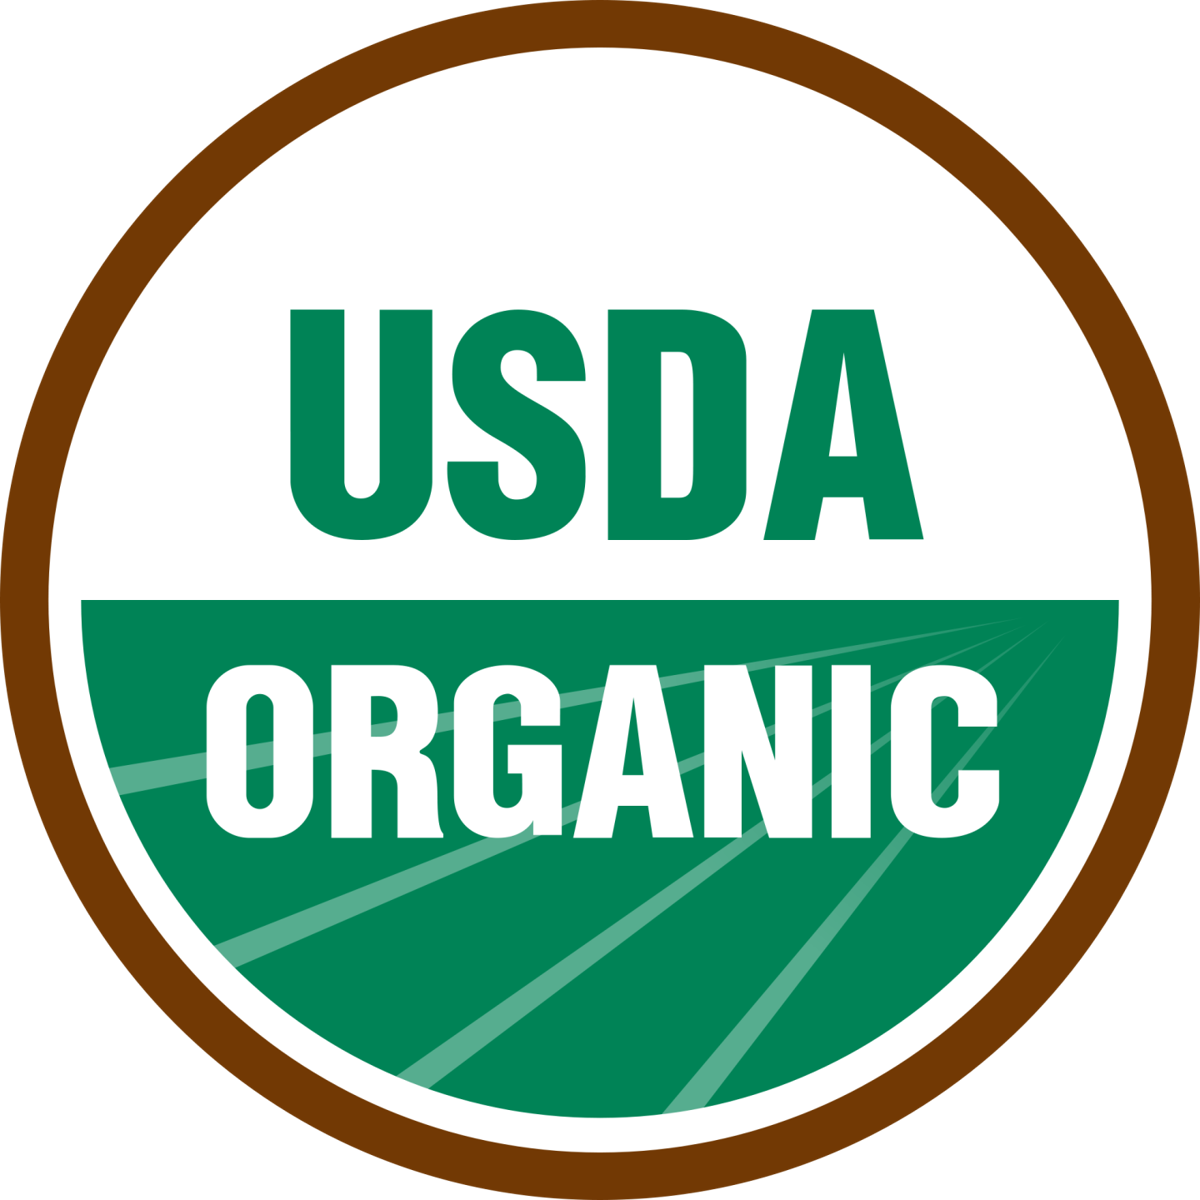 Hsus sues usda over. Rules clipart strict rule